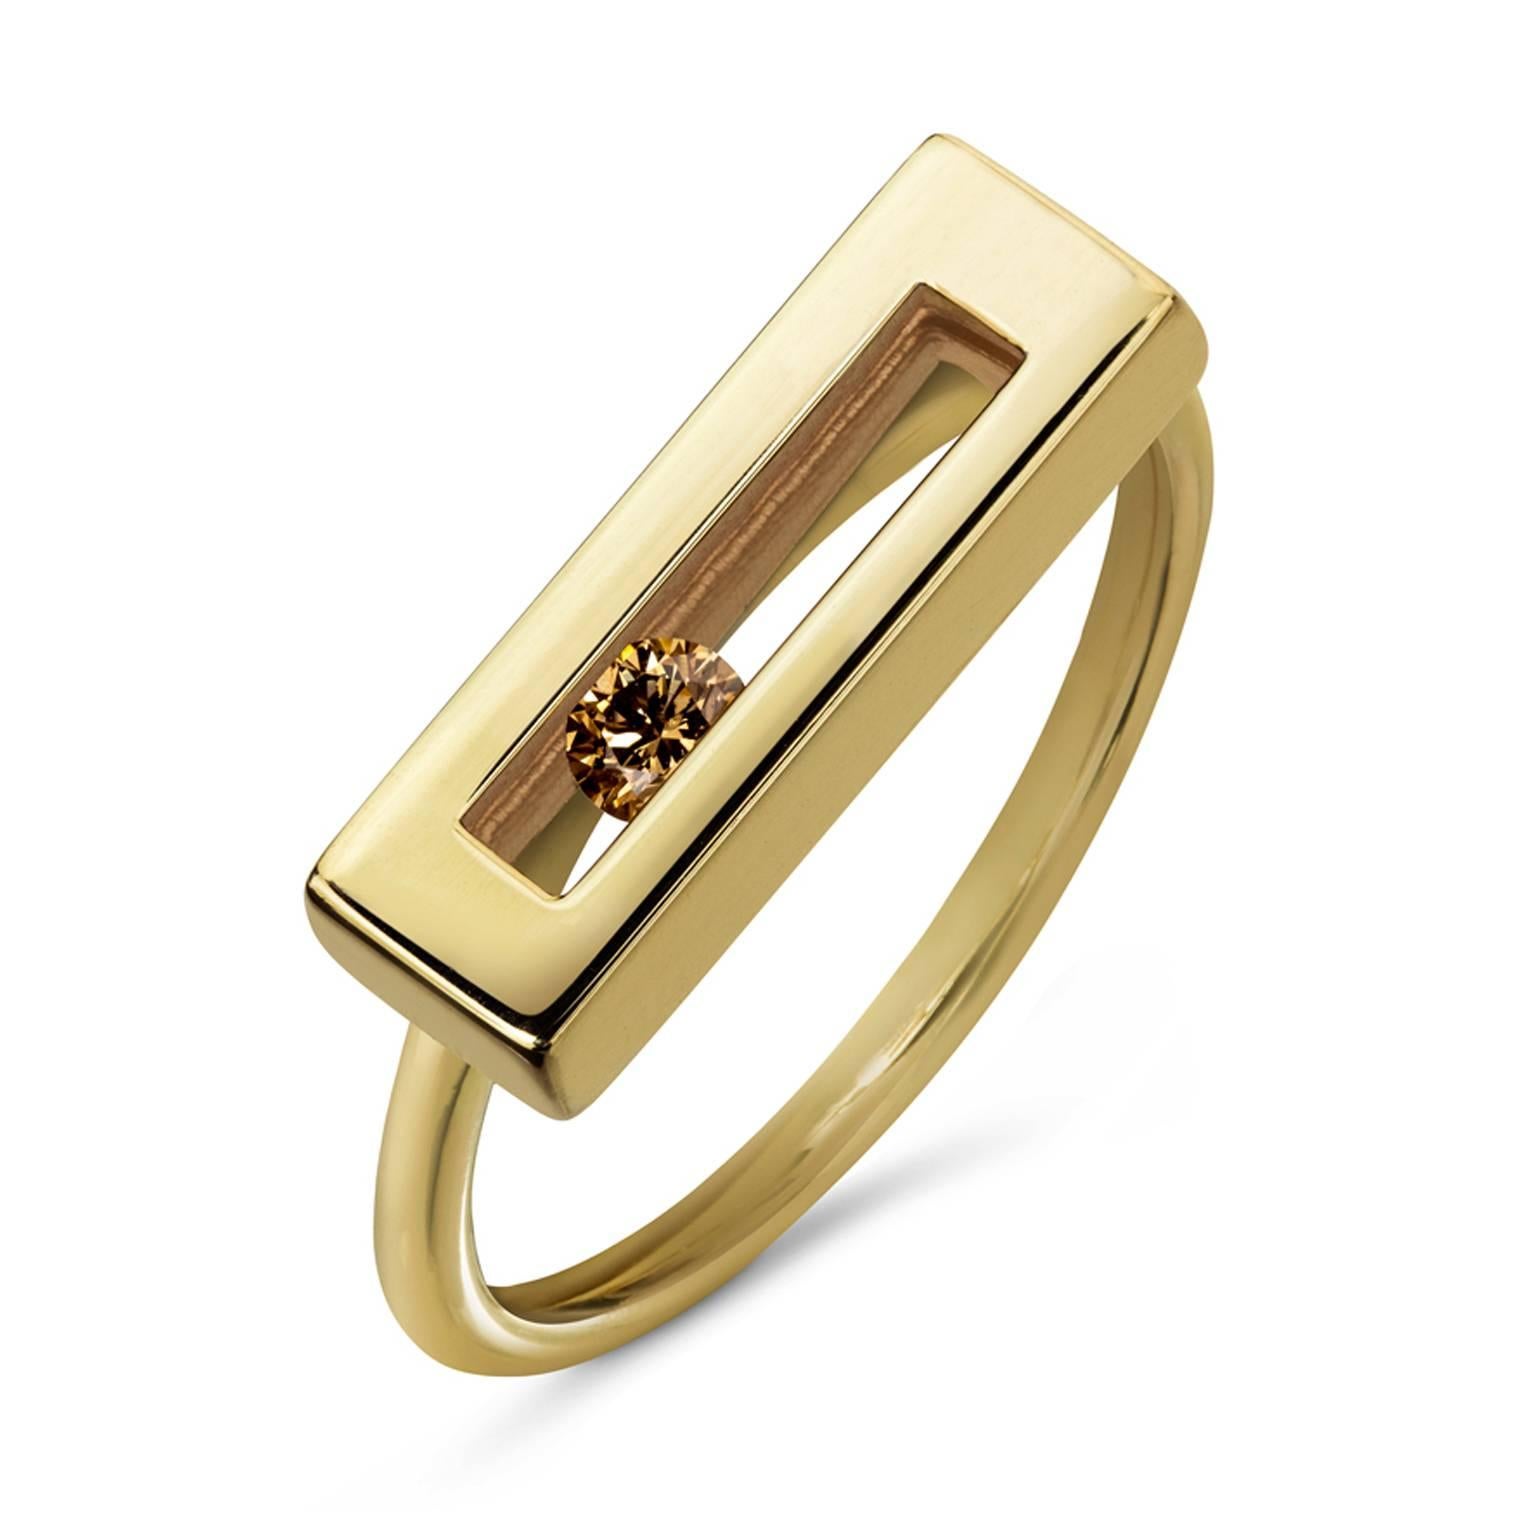 The Slide Collection was inspired by Luke's original award winning SLIDE ring, which won the Lonmin Design Innovation Award in London in 2013. This fine jewellery collection features beautifully simple forms in solid 9ct gold and a signature sliding